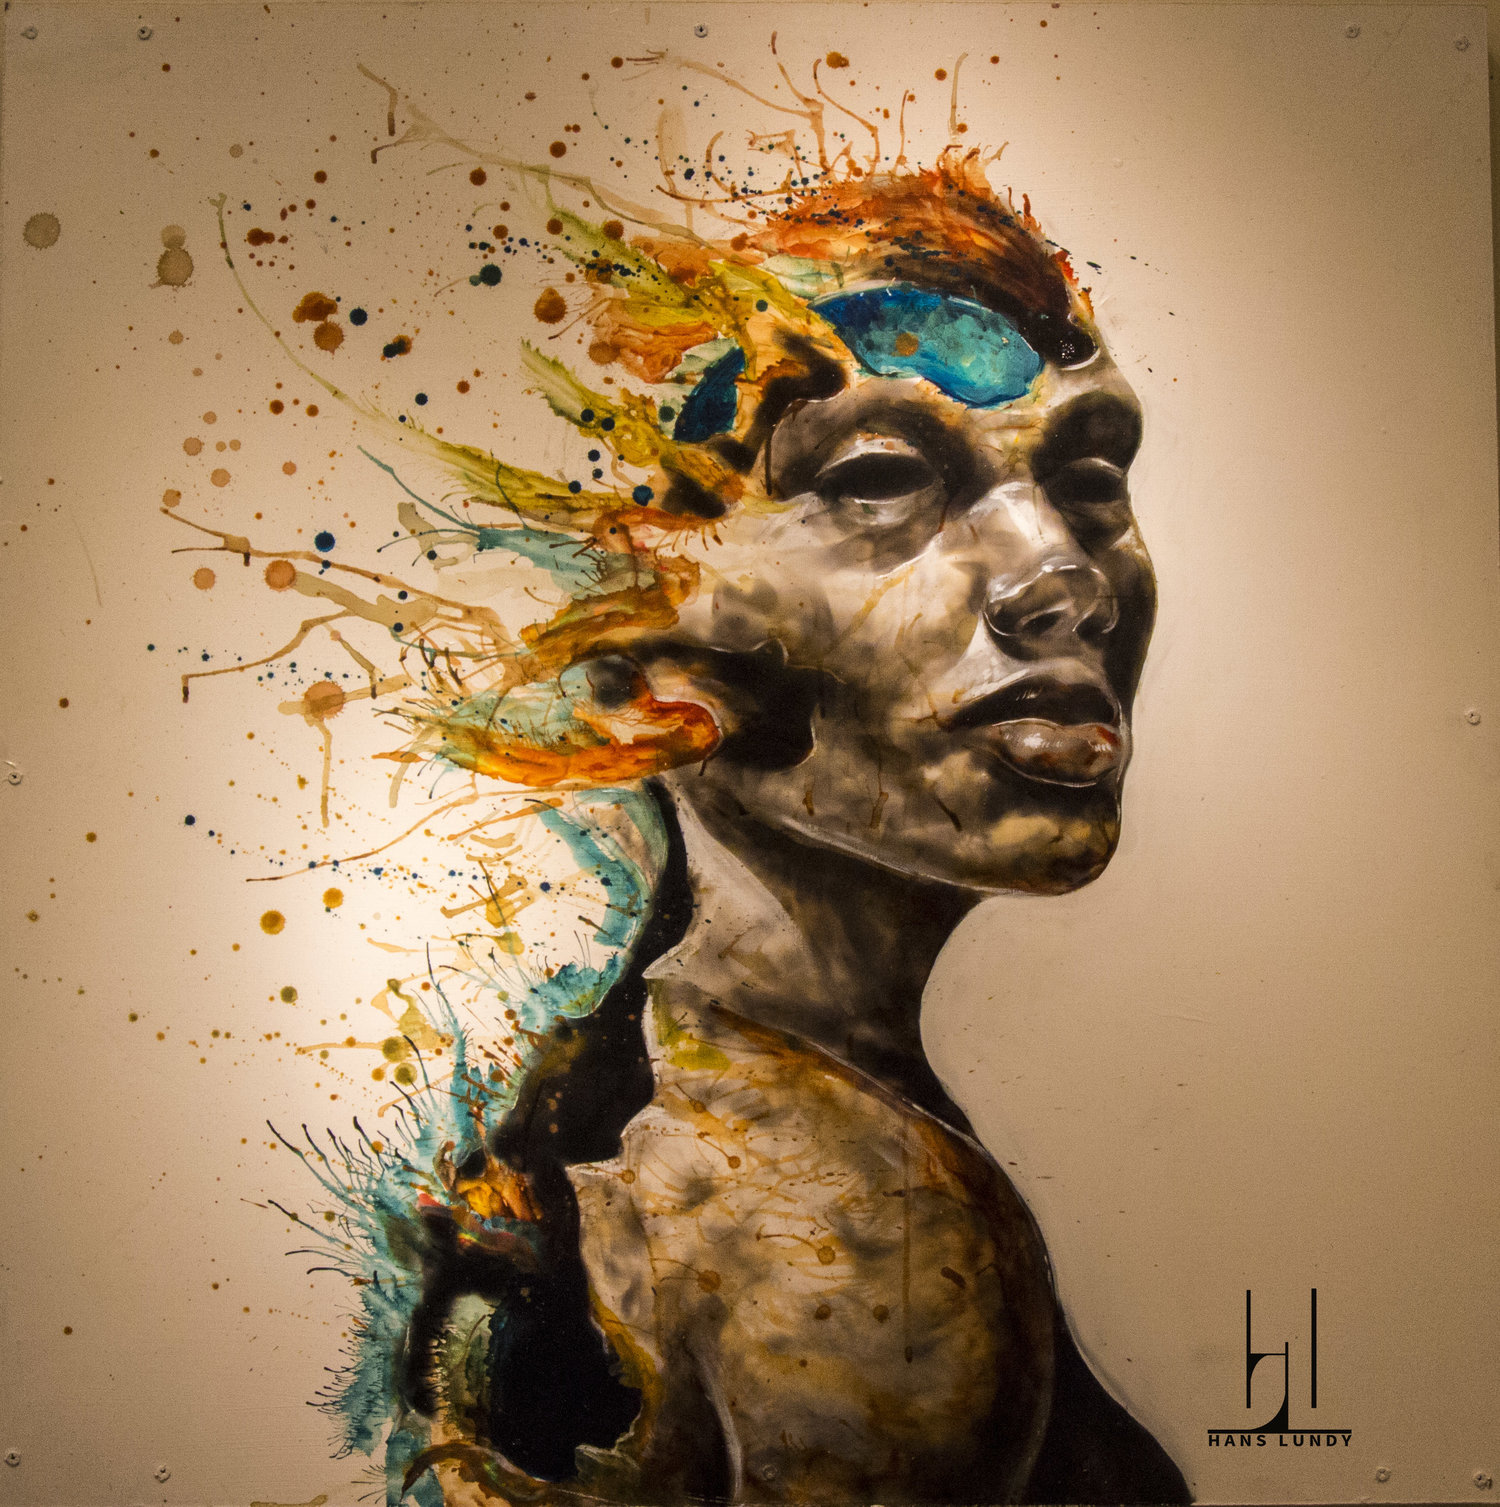 Hans Lundy's mixed media work titled "Man Man".